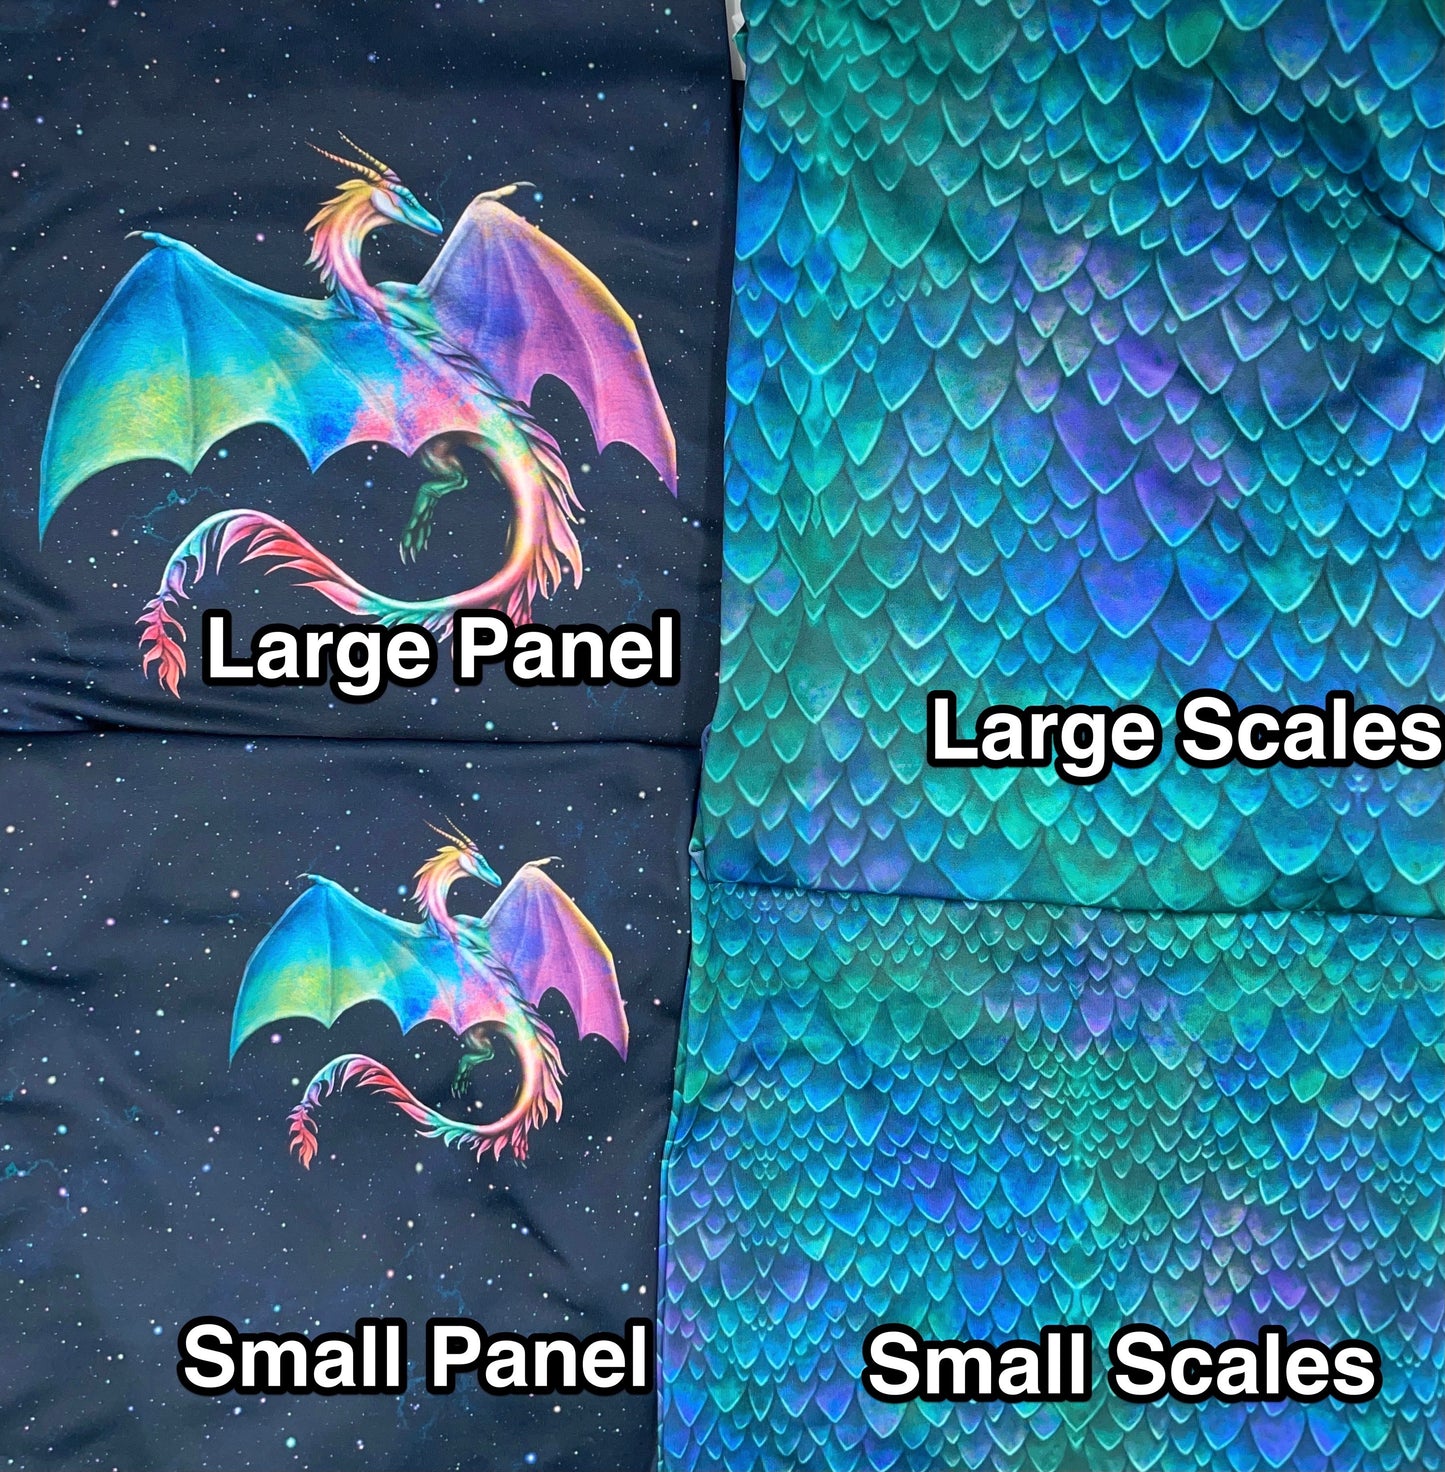 Brushed Jersey:  Small Colorful Dragon Panel (Fat Half)